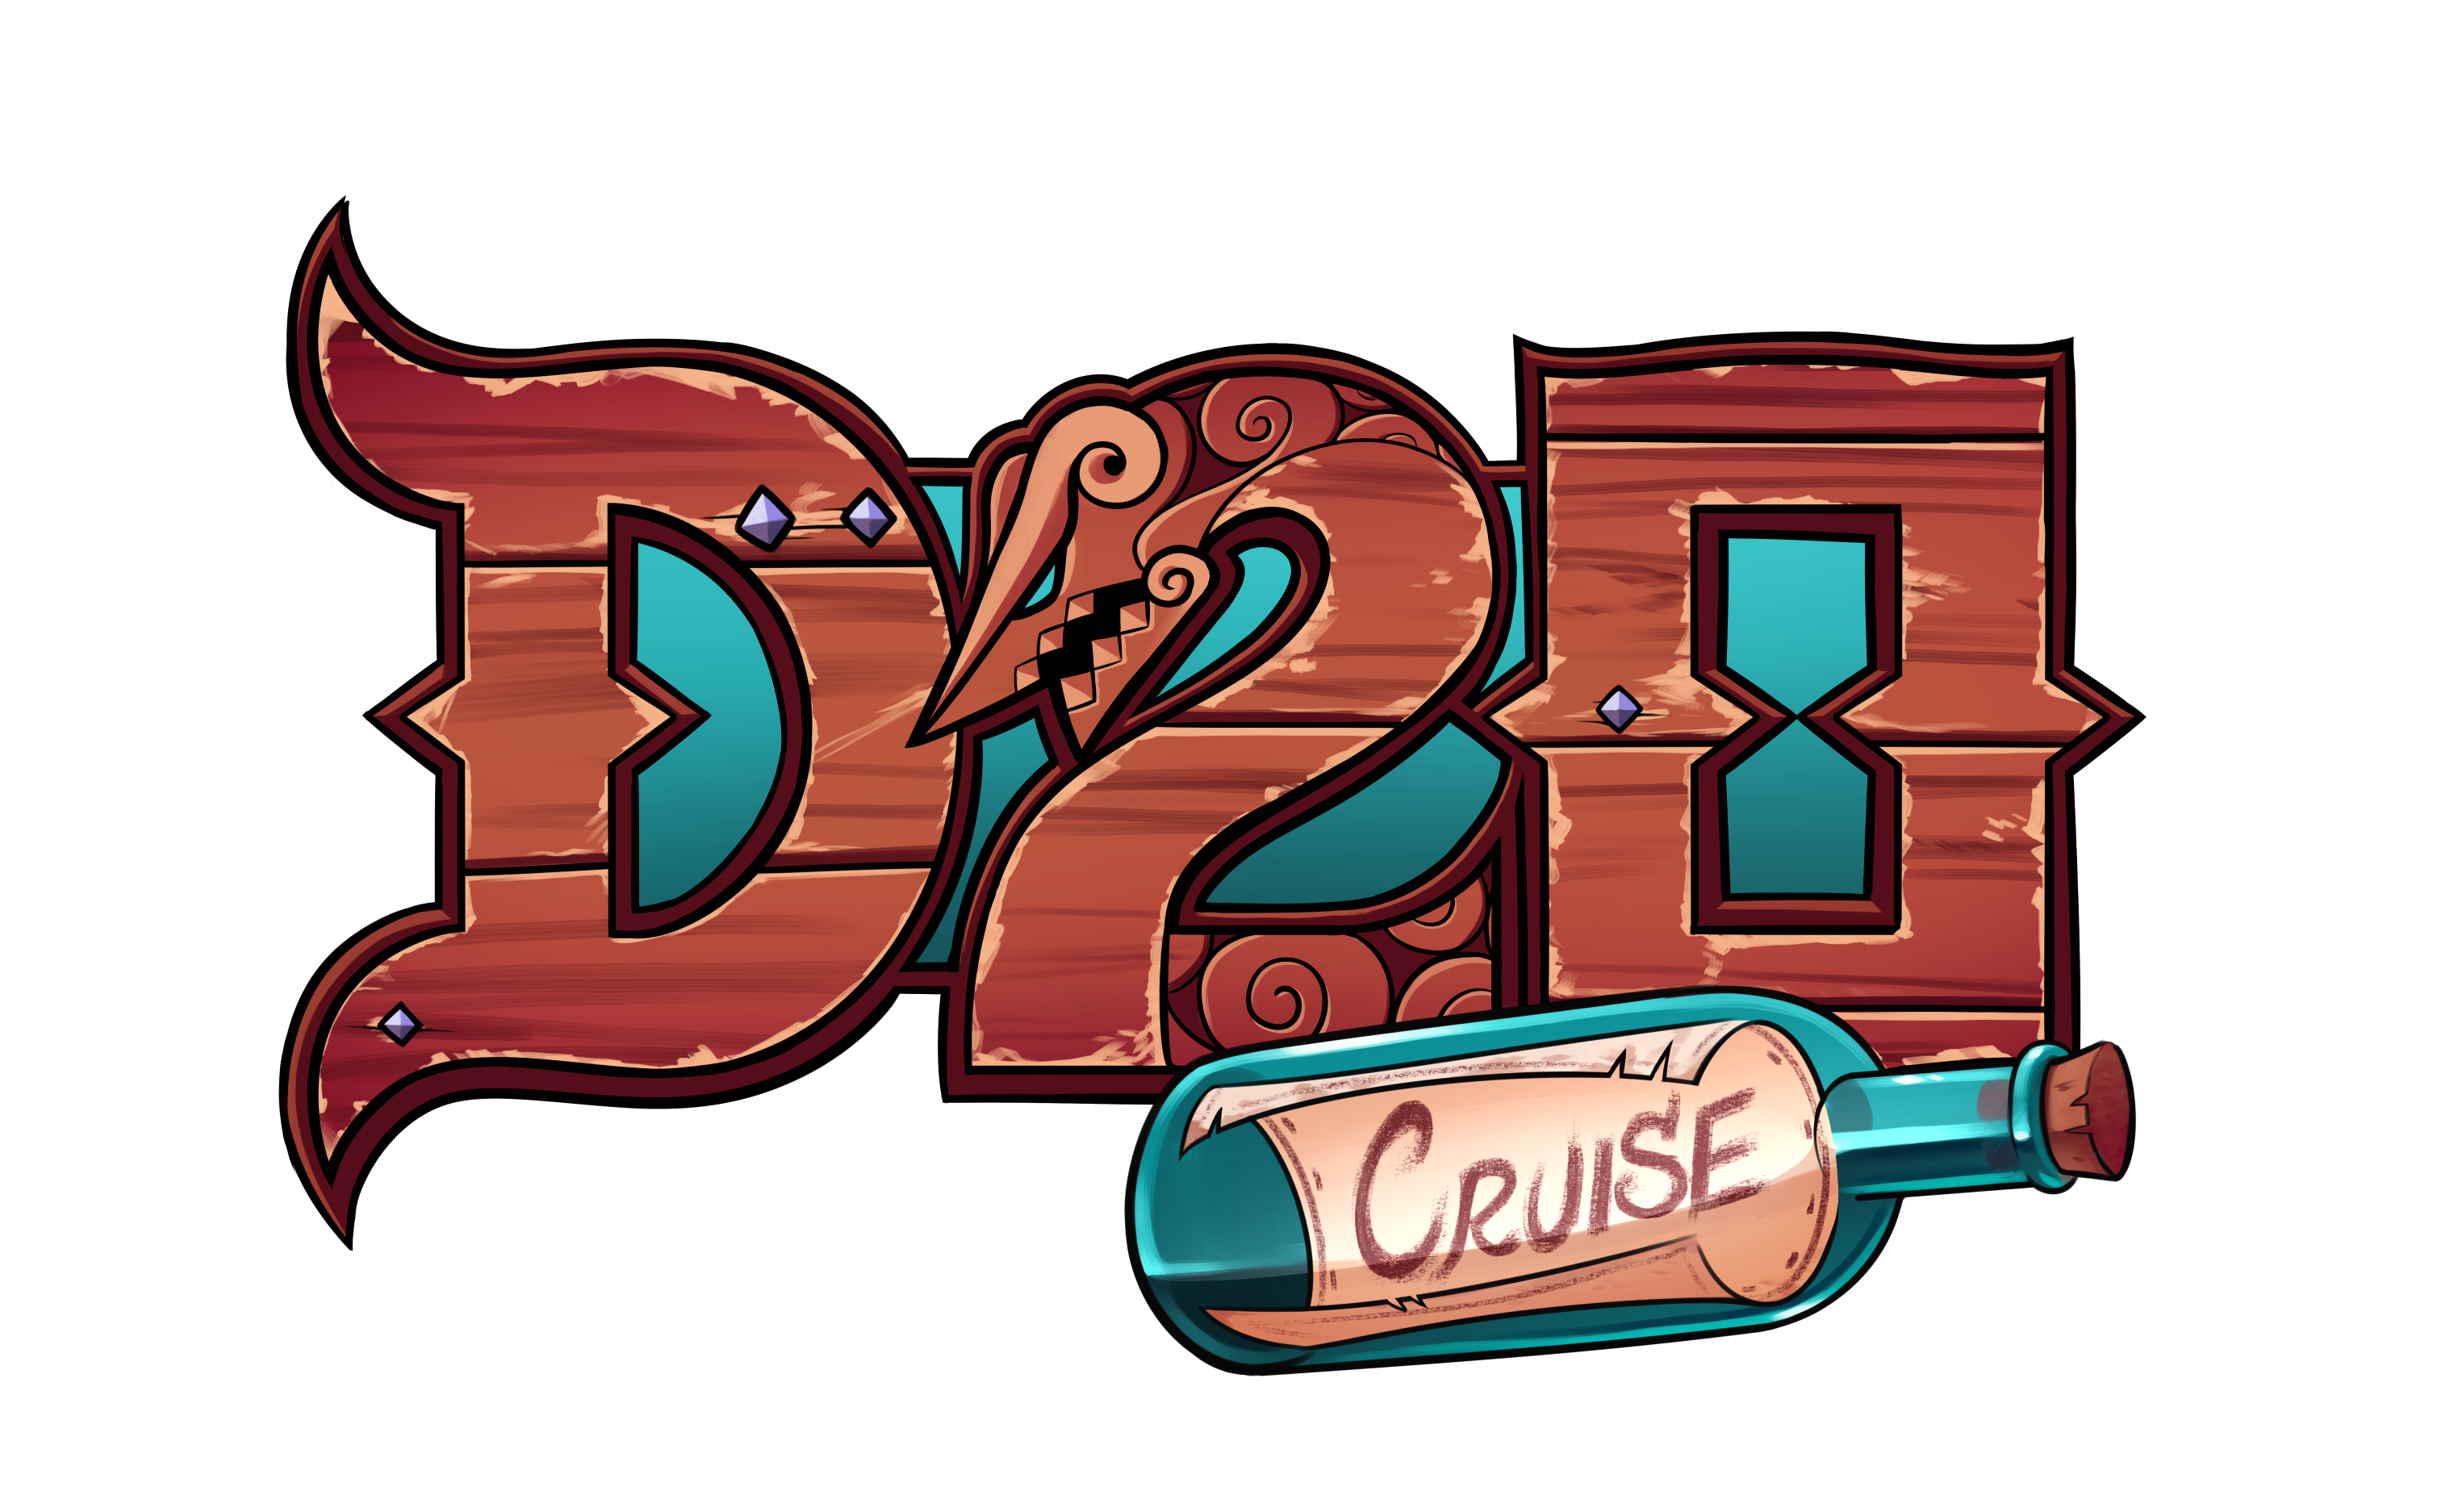 Meet the D20 Cruise Dungeon Masters